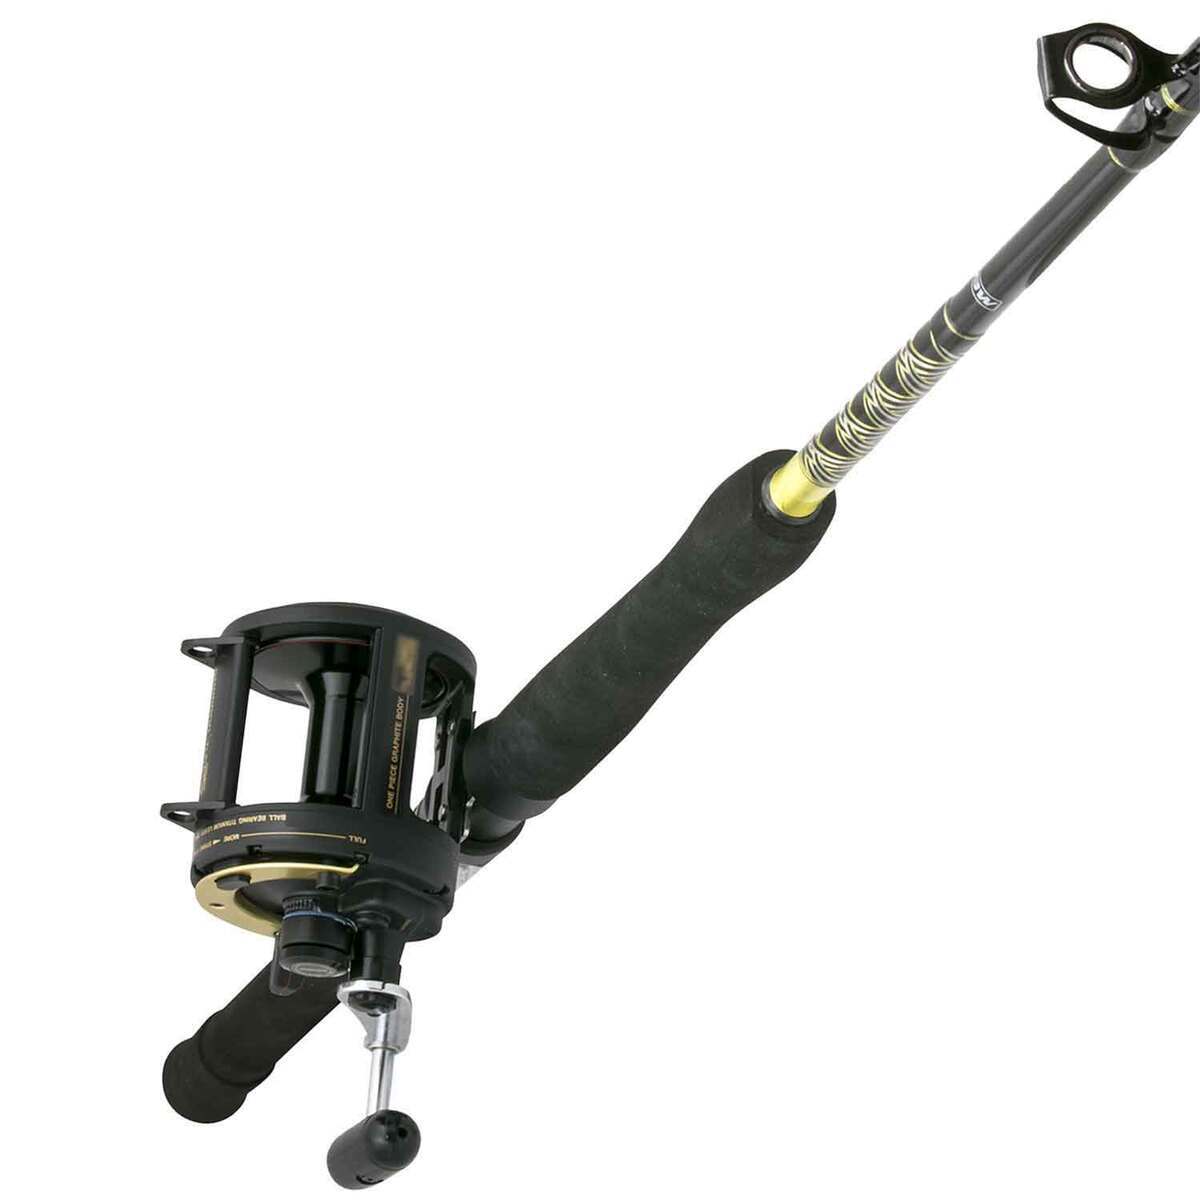 Rod & Reel Accessories For Sale on Weapon Depot